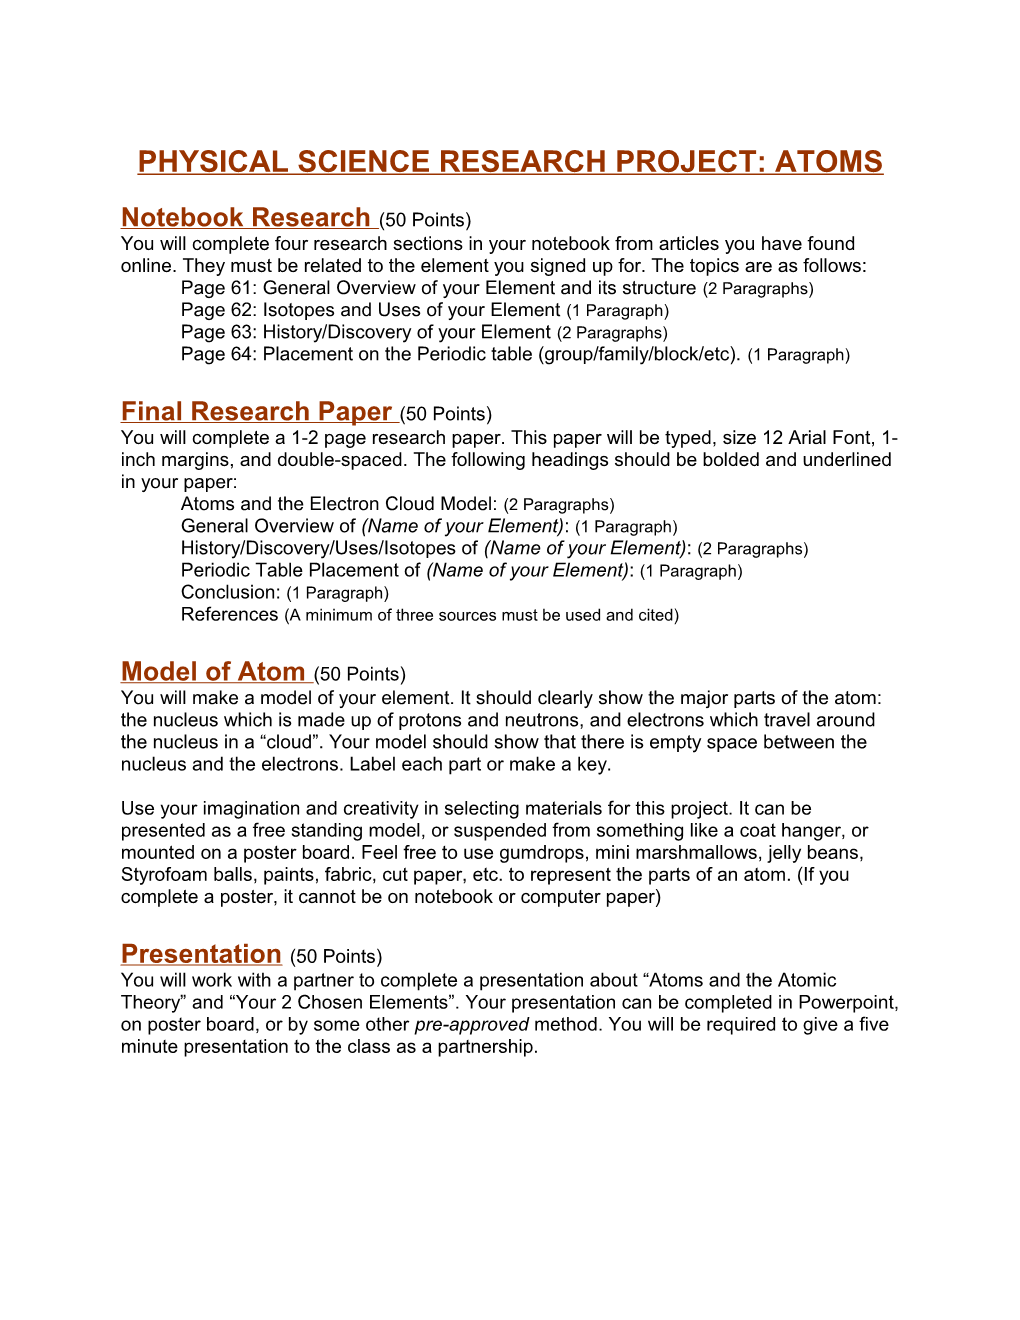 Physical Science Research Project: Atoms